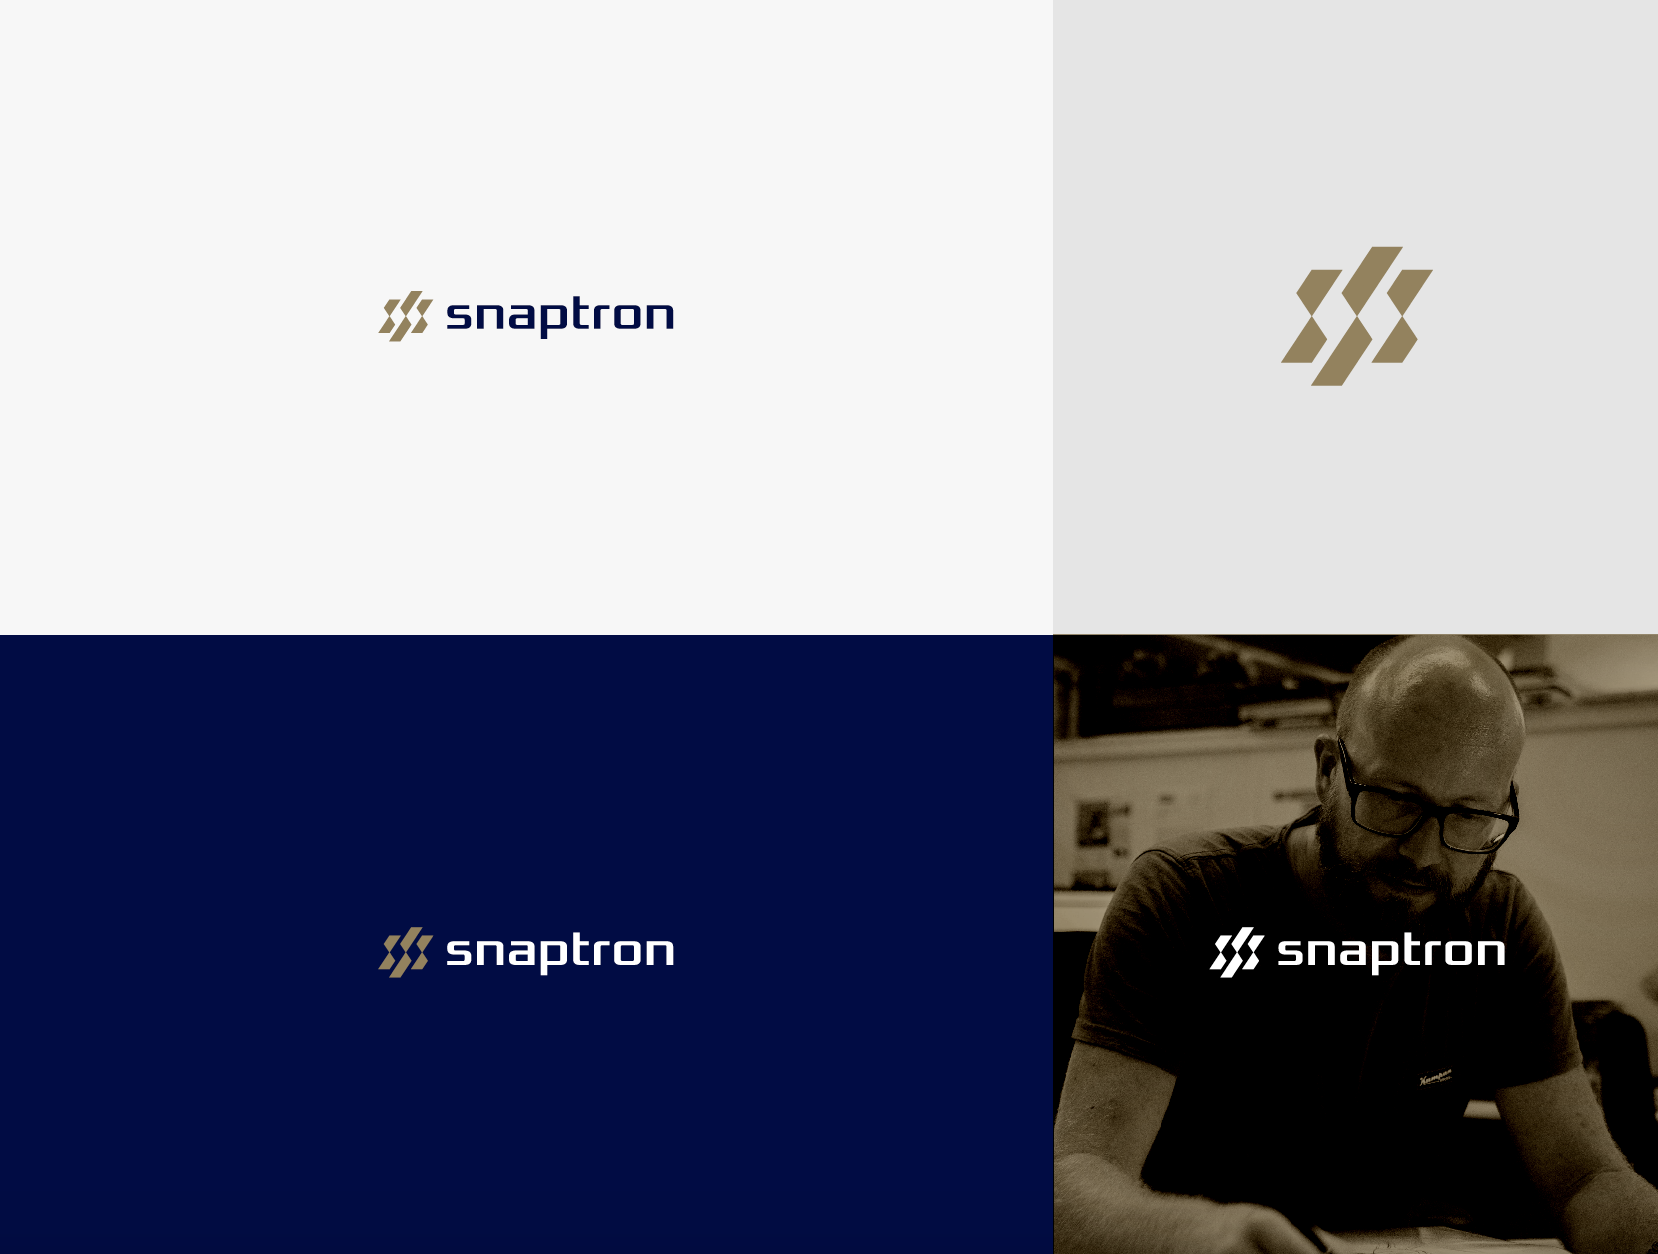 Snaptron's updated logo and branding provides a more sophisticated and modern look for the switch manufaturer